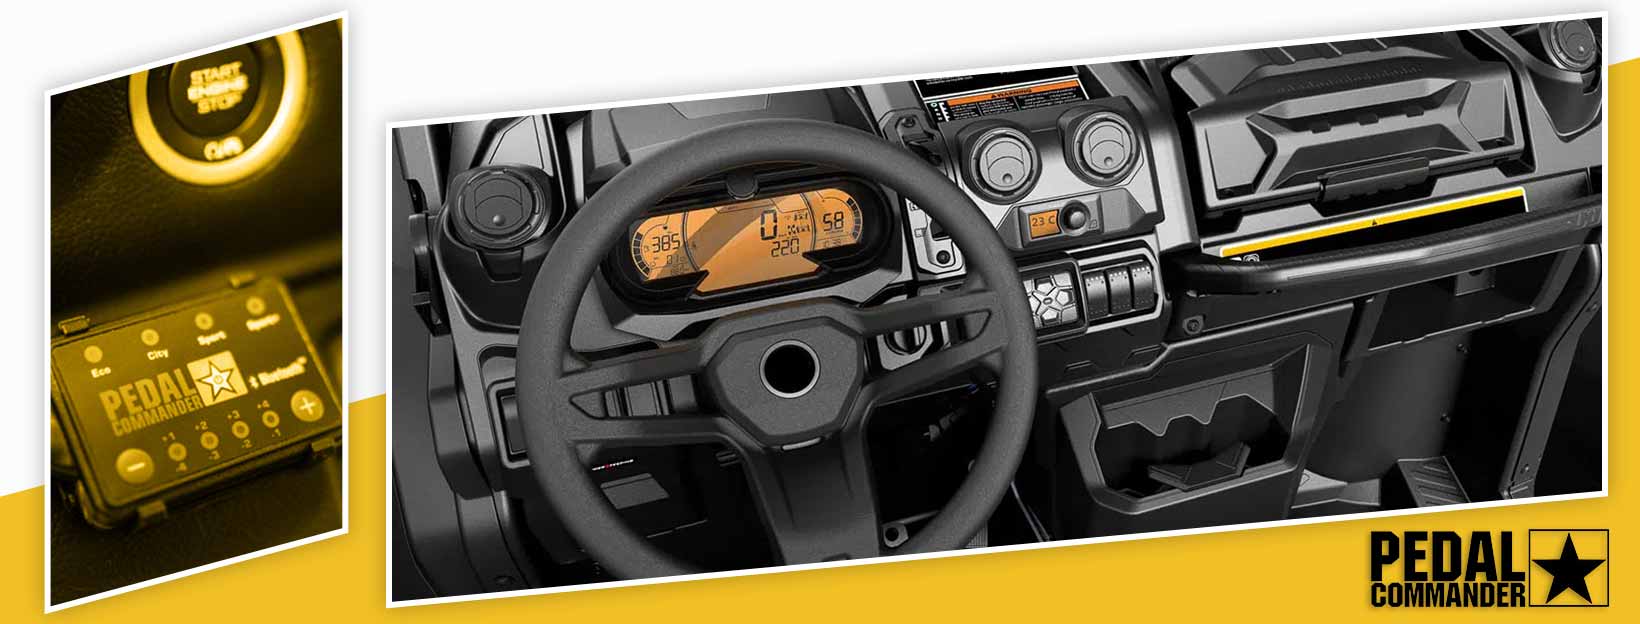 Pedal Commander for Can-Am Defender - interior